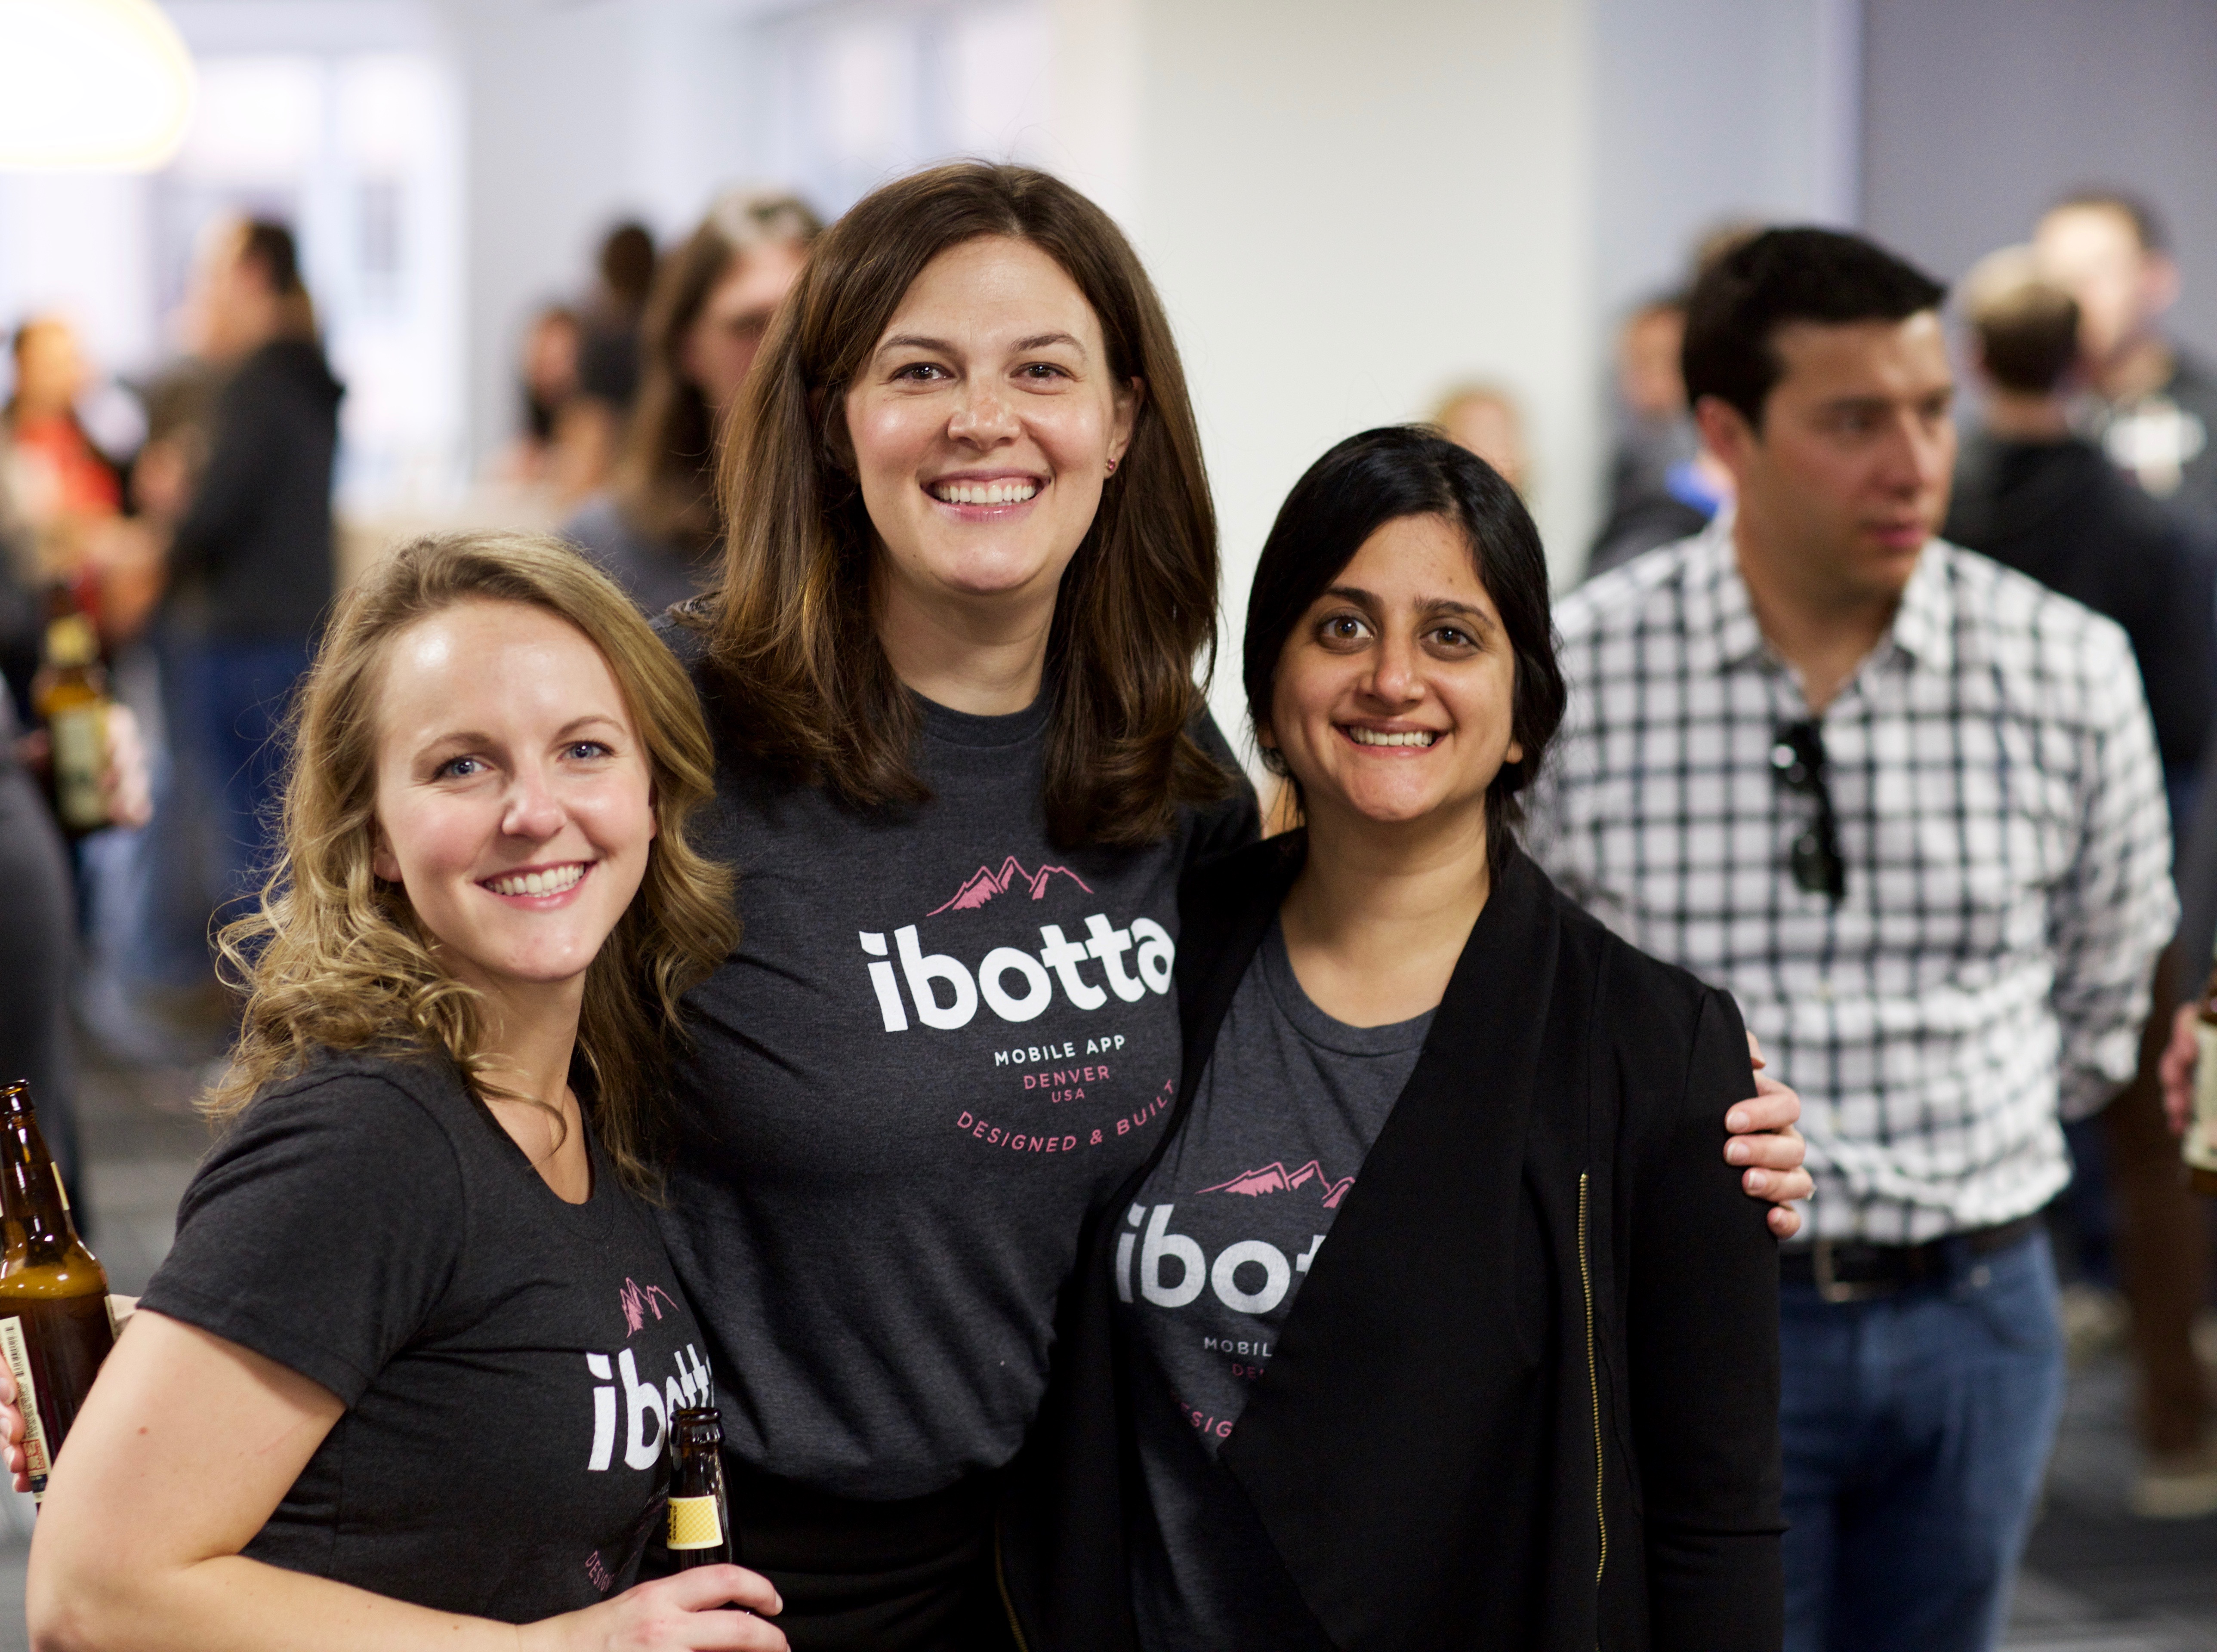 three women with Ibotta tshirts smile in-office